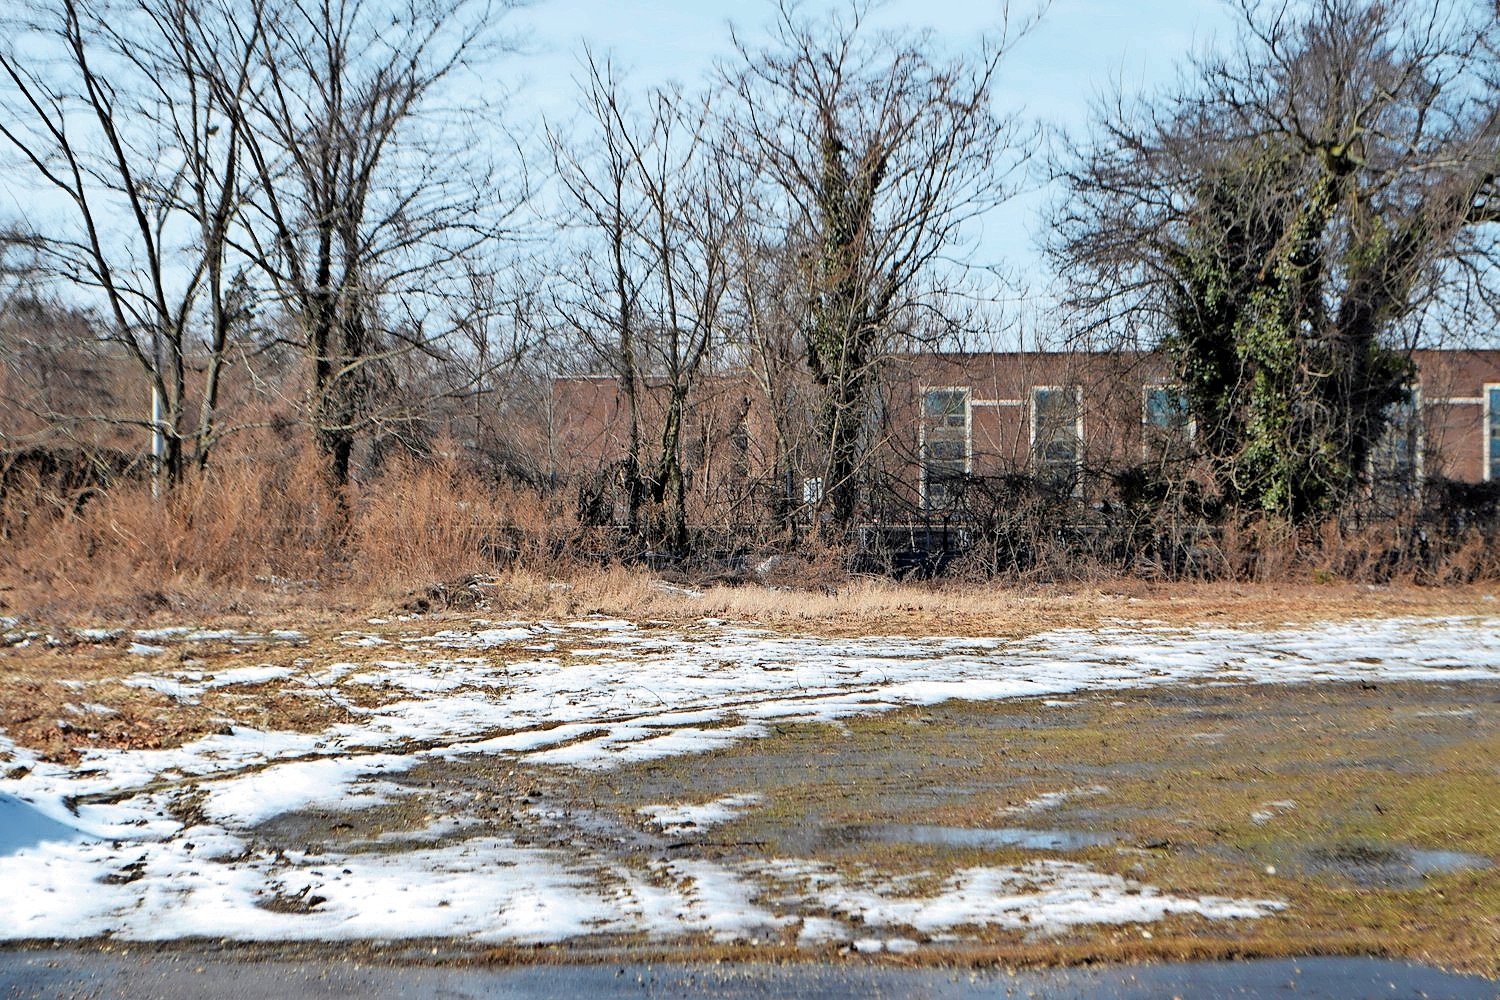 The Rock Hall Road land, where the former sewage treatment plant stood, is being targeted for 13 single-family homes.